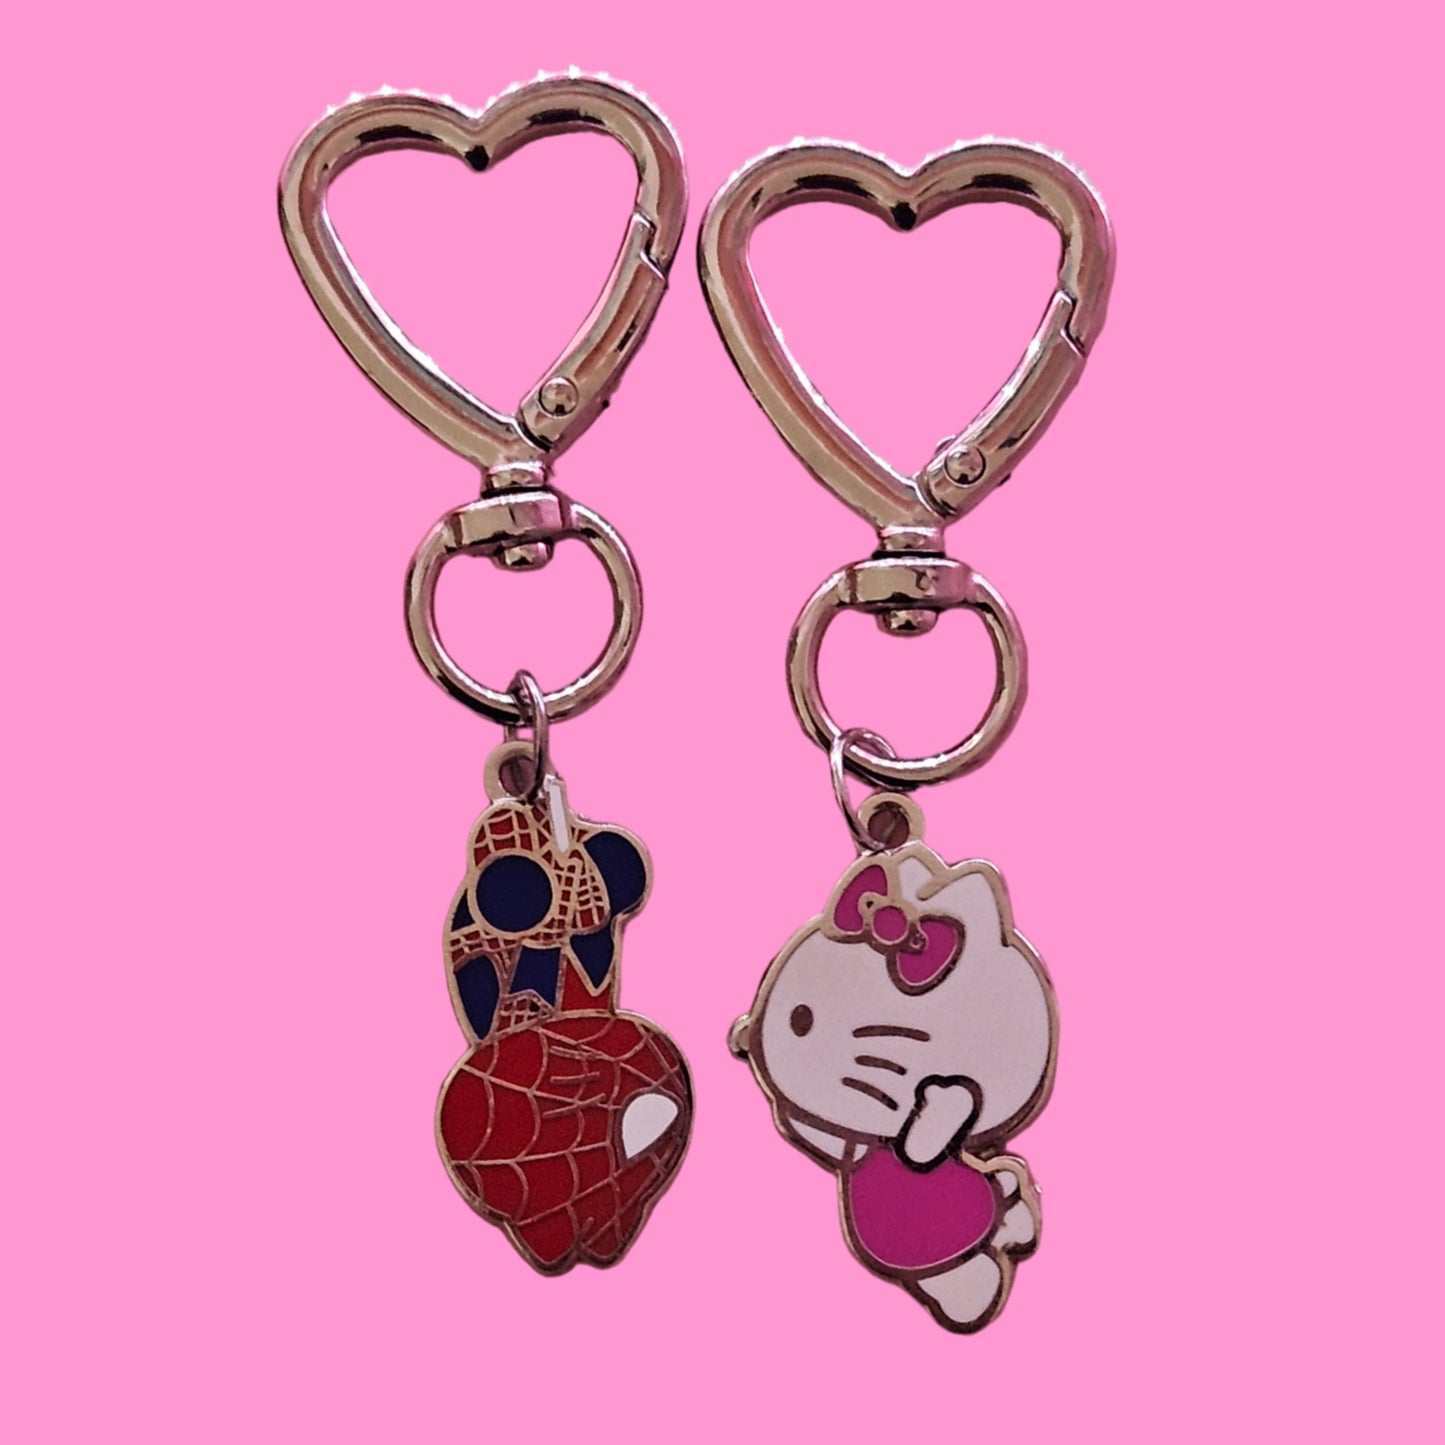 HK and Spider keychains